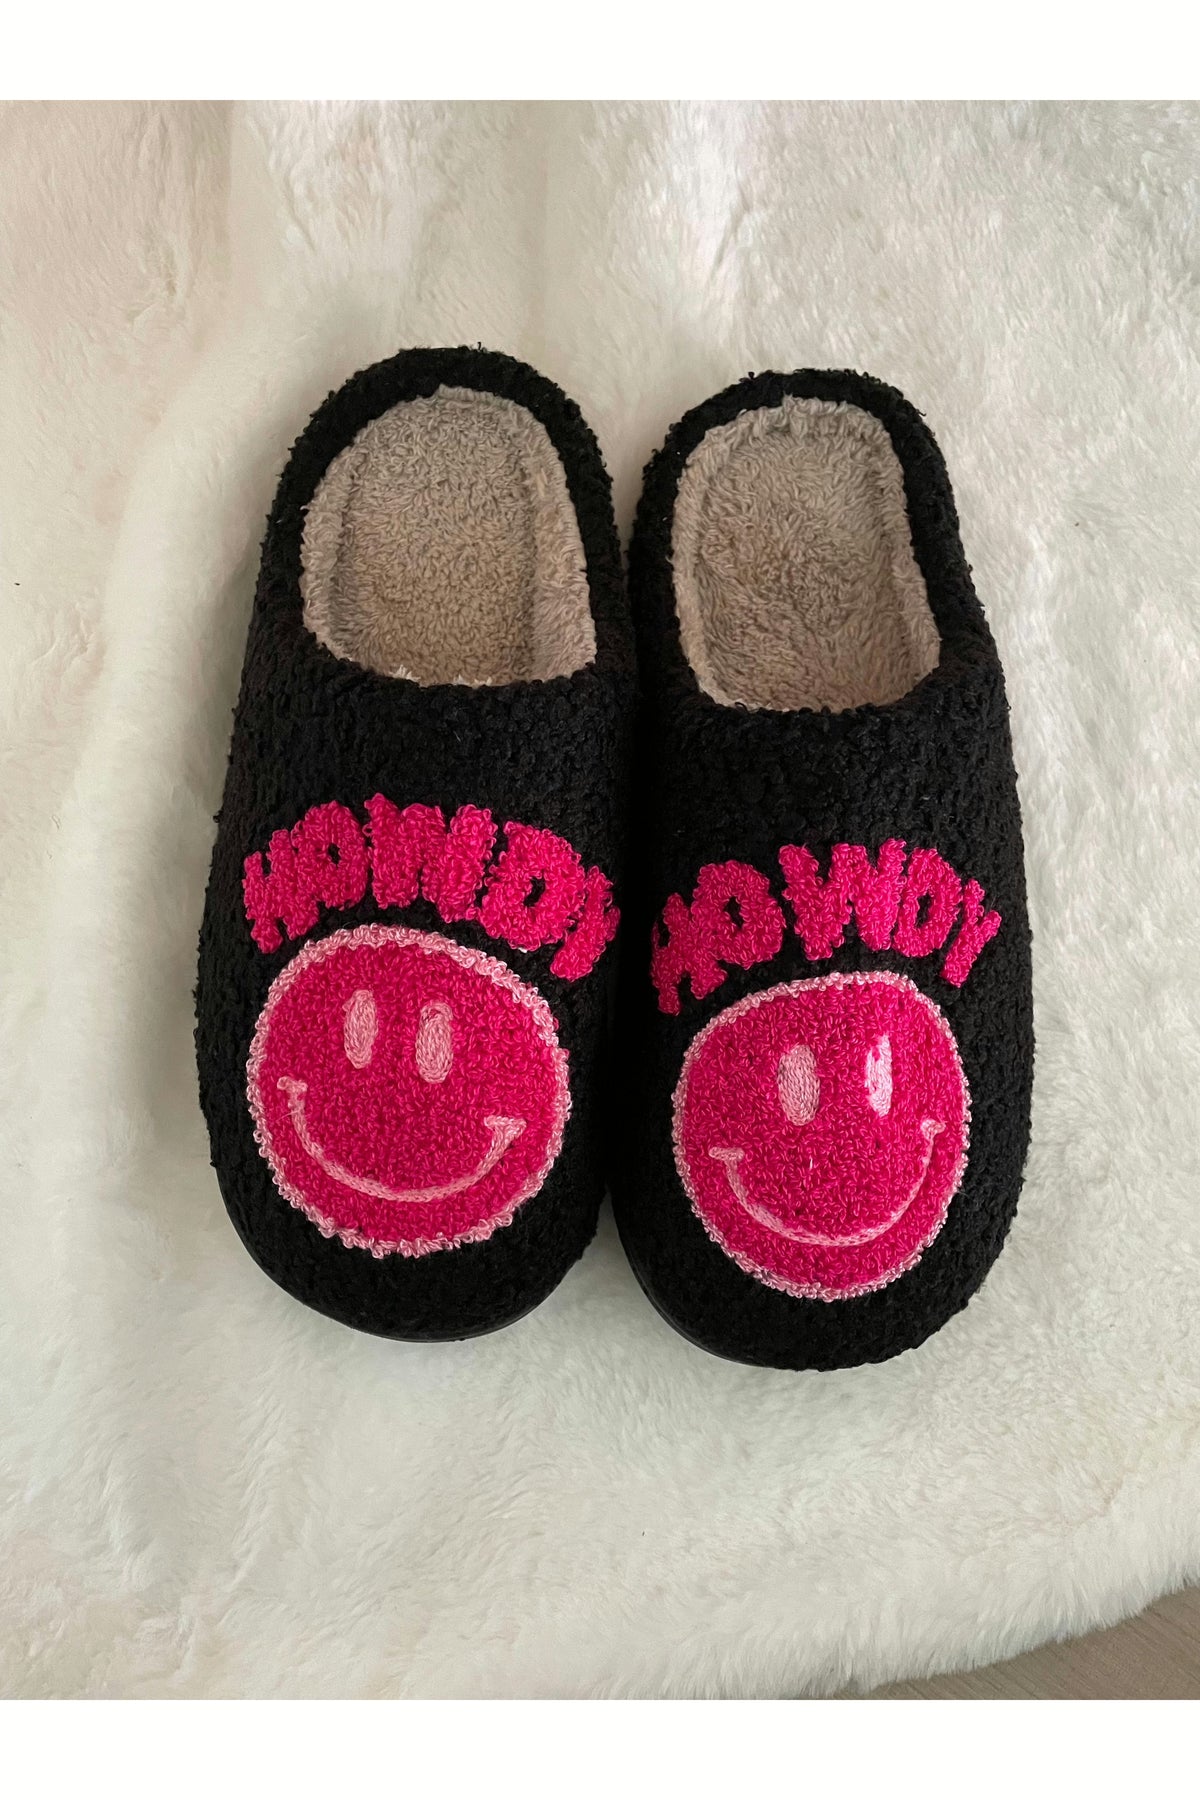 HOWDY Slippers